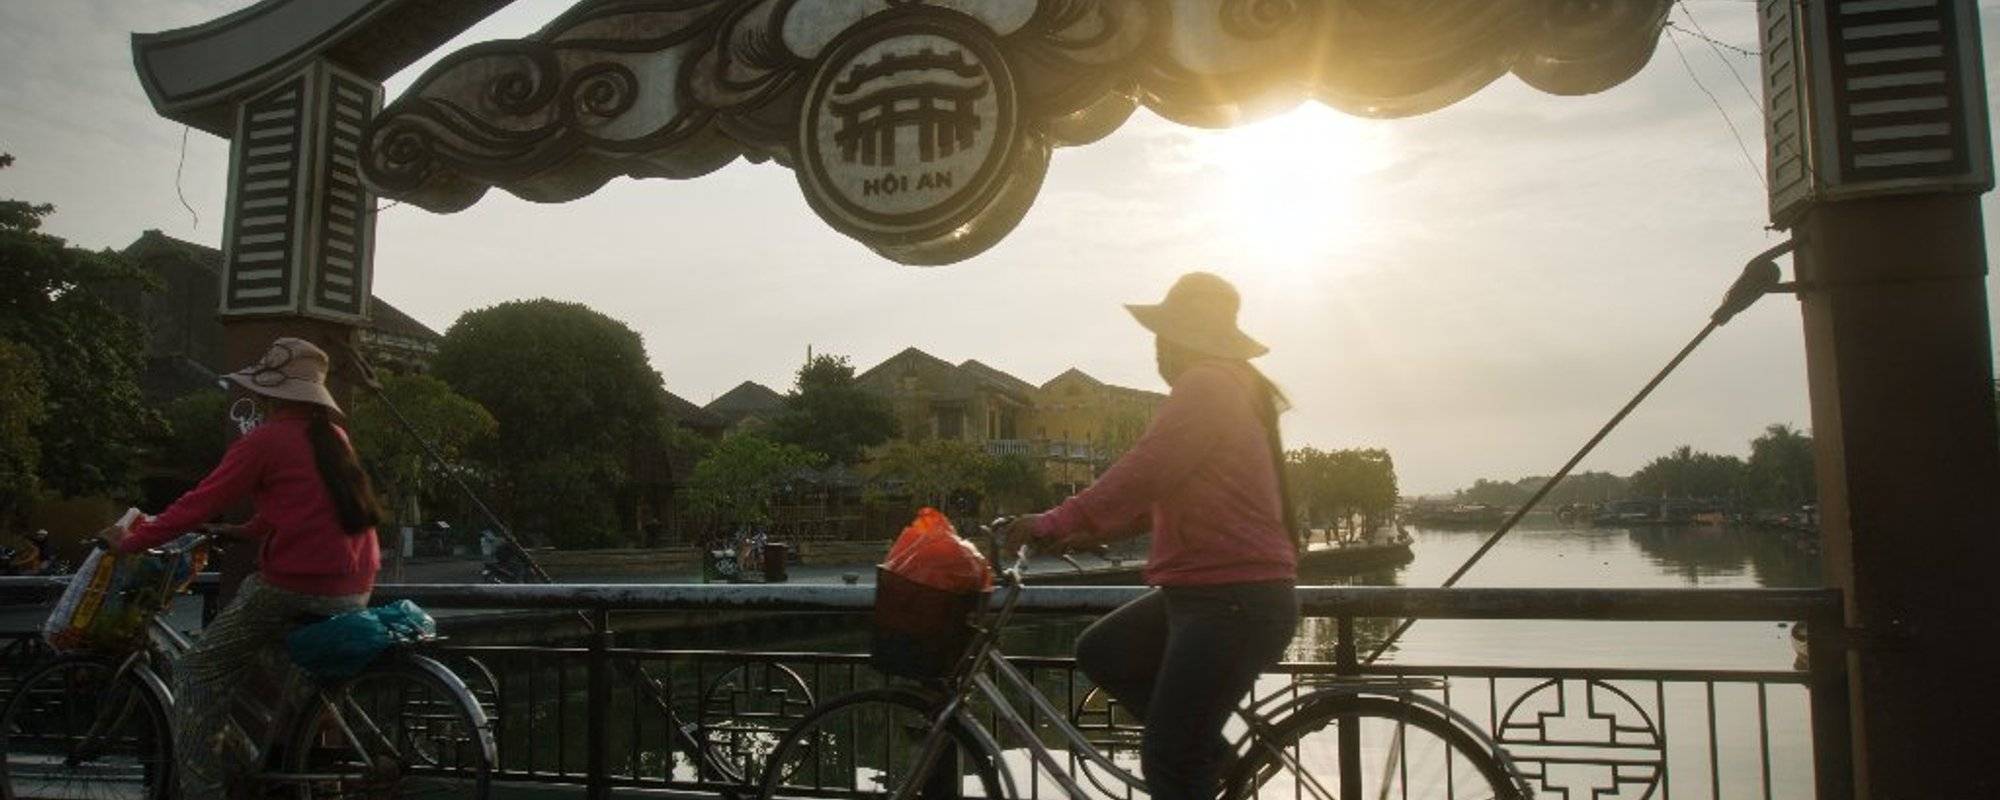 Exploring Vietnam: HOI AN a walkabout of the city in the morning